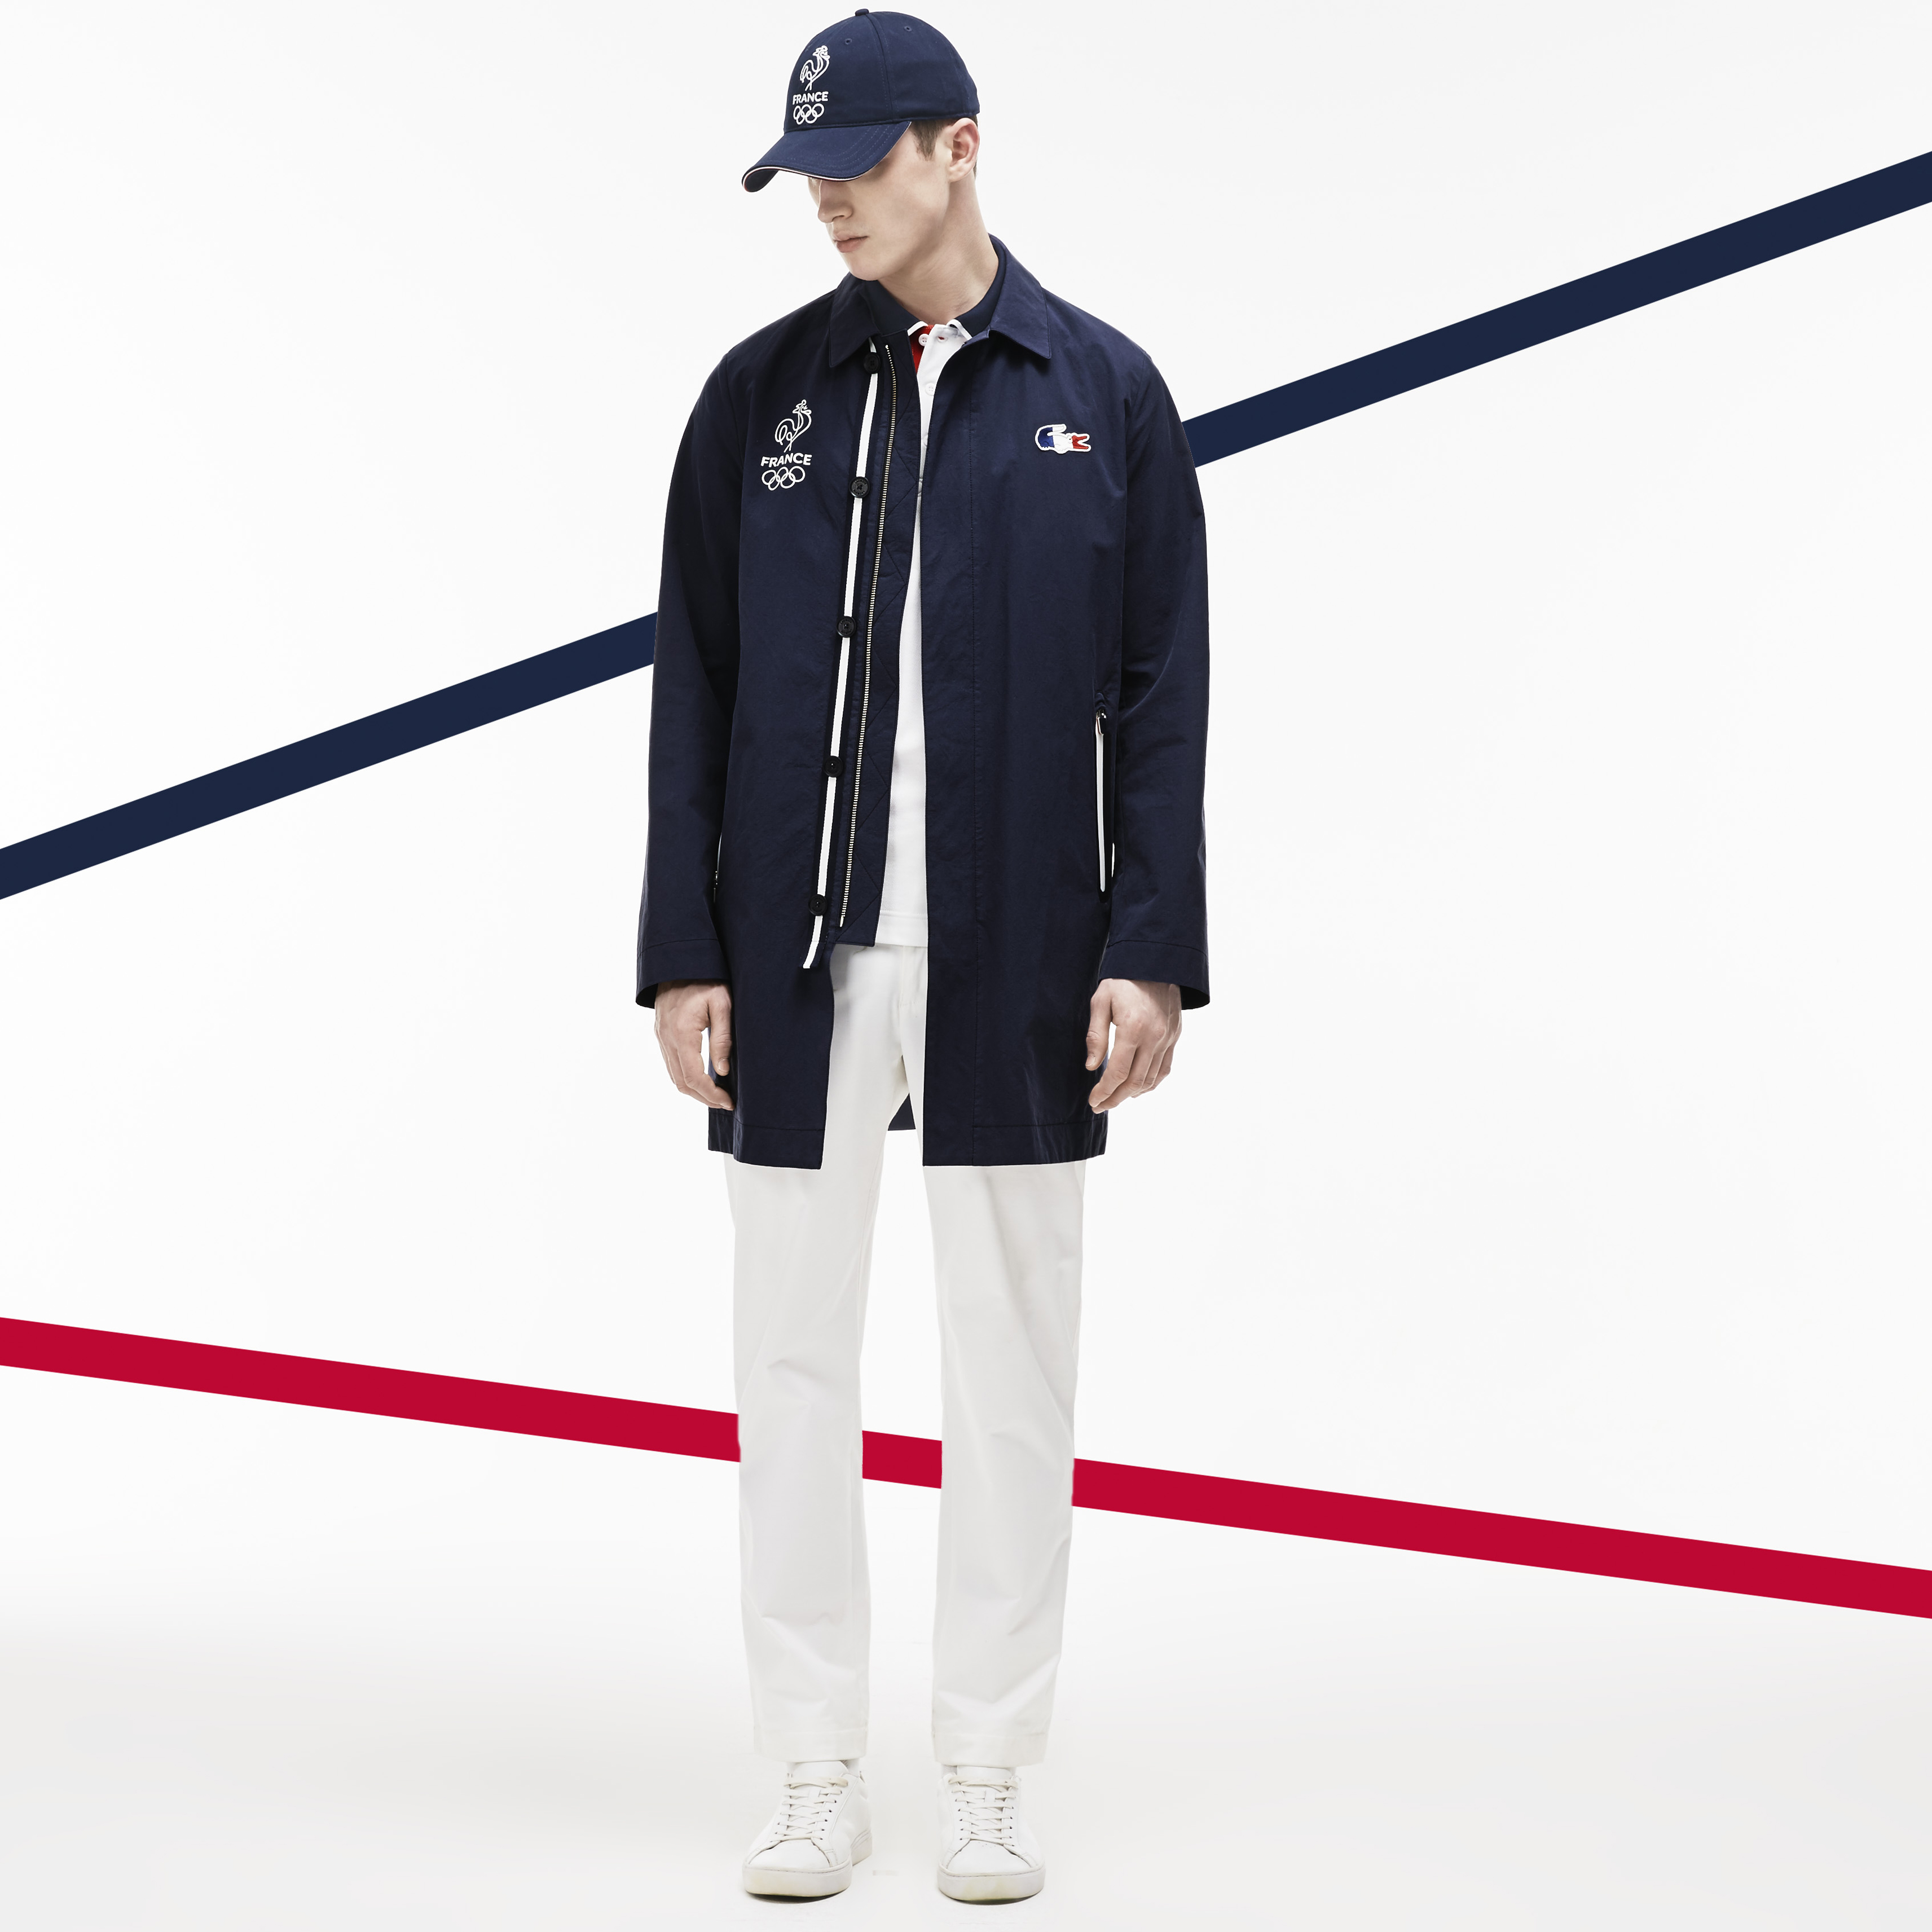 lacoste olympic heritage collection